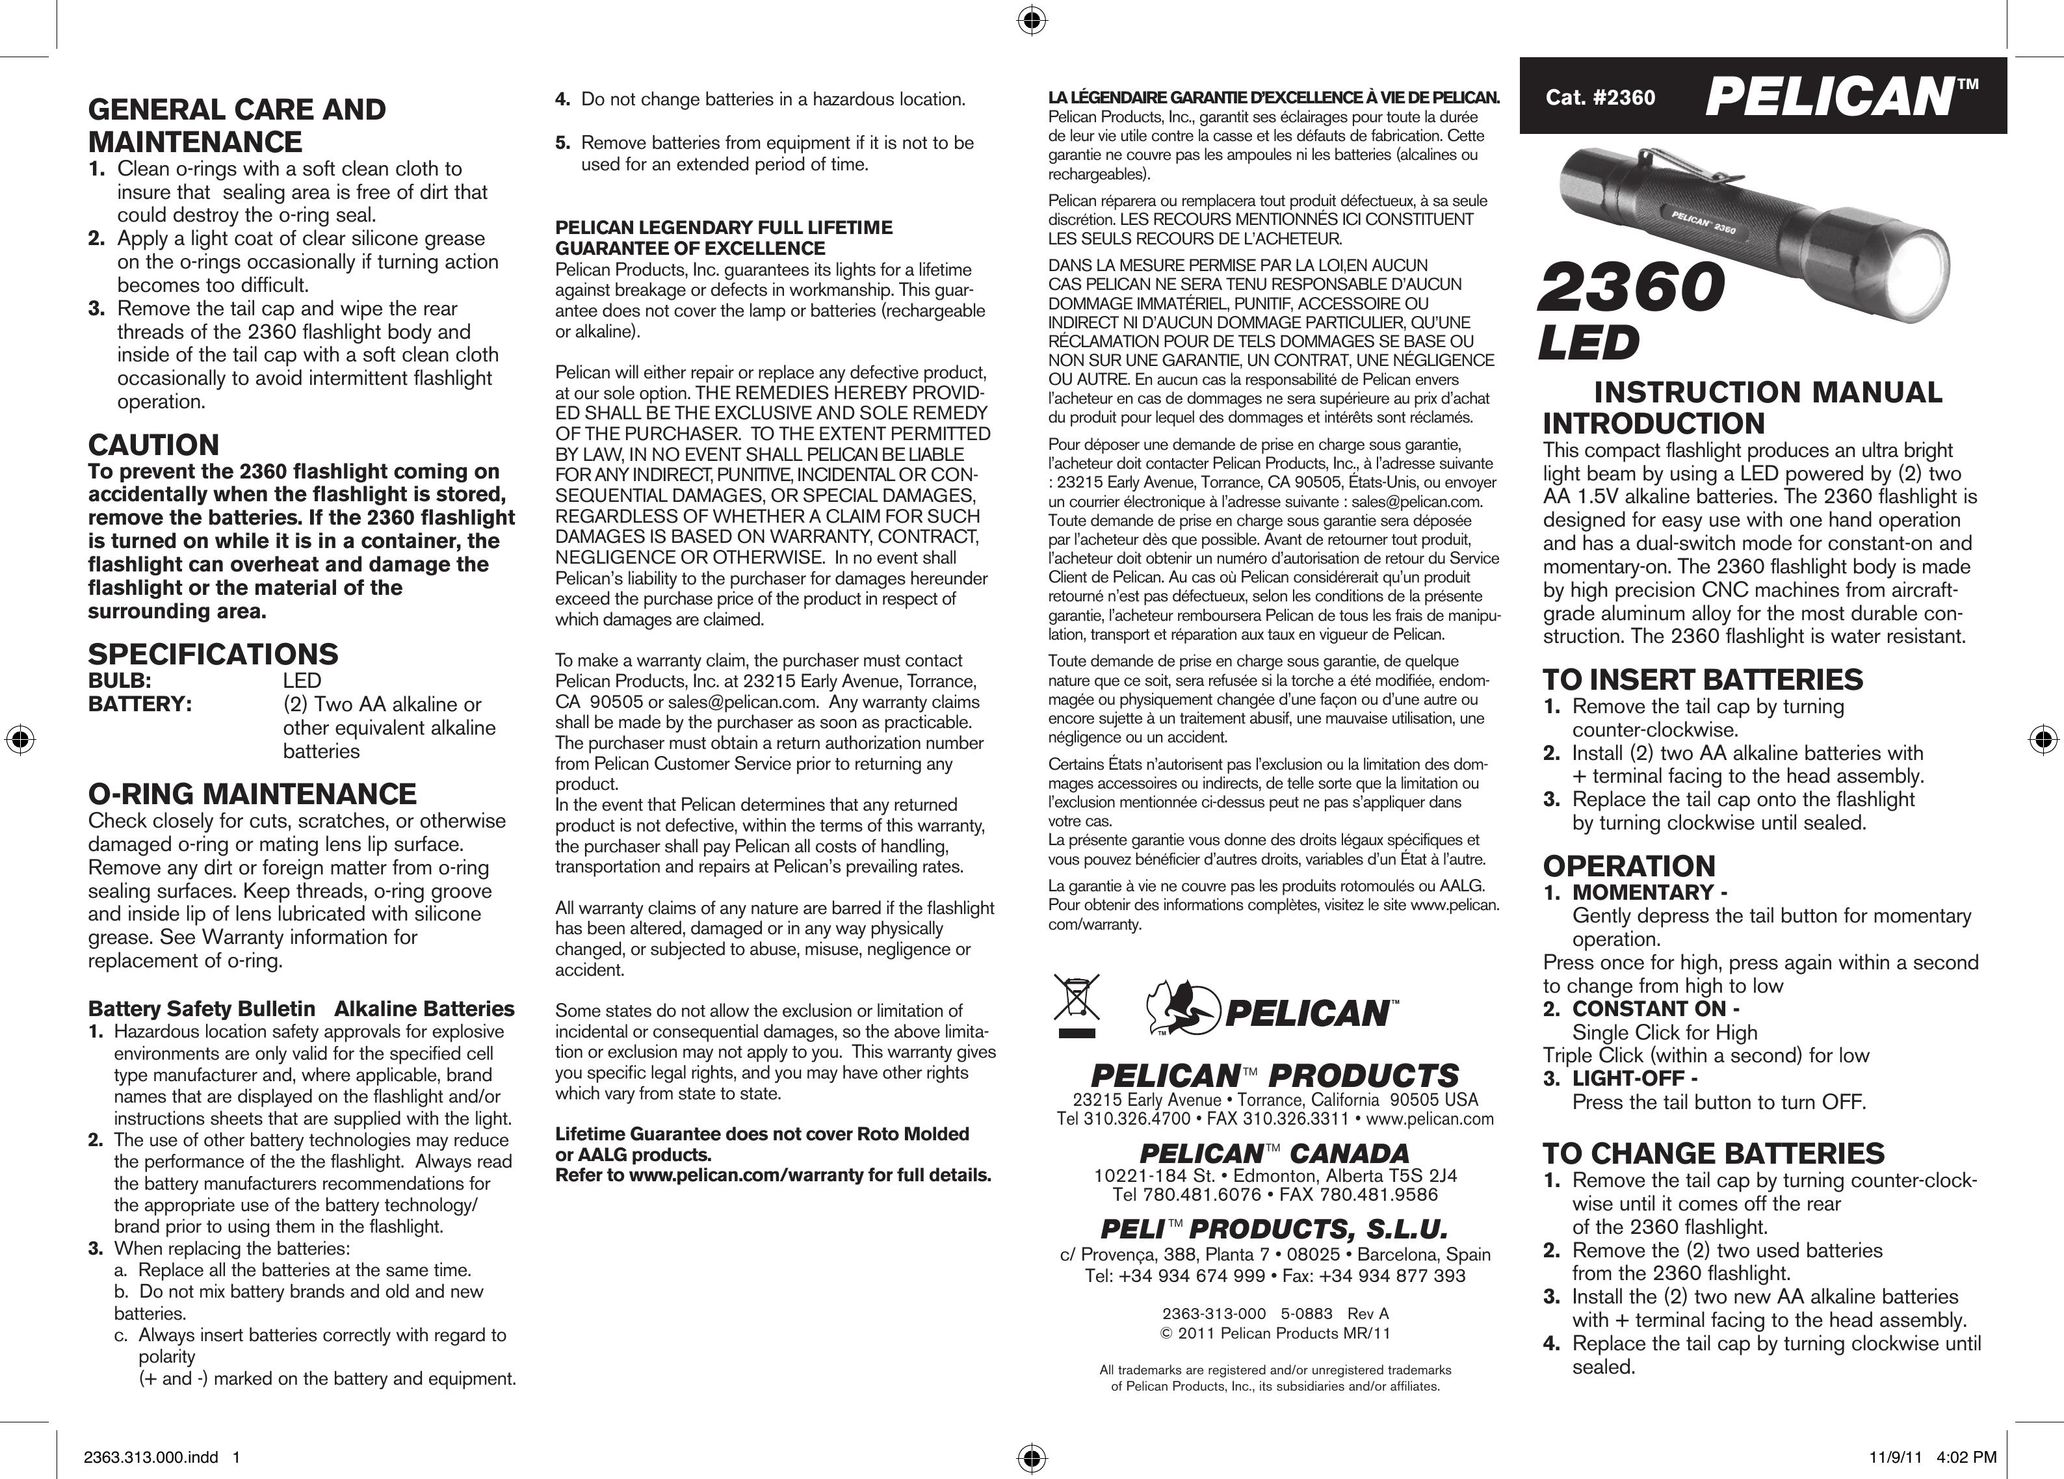 Pelican 2360 Home Safety Product User Manual